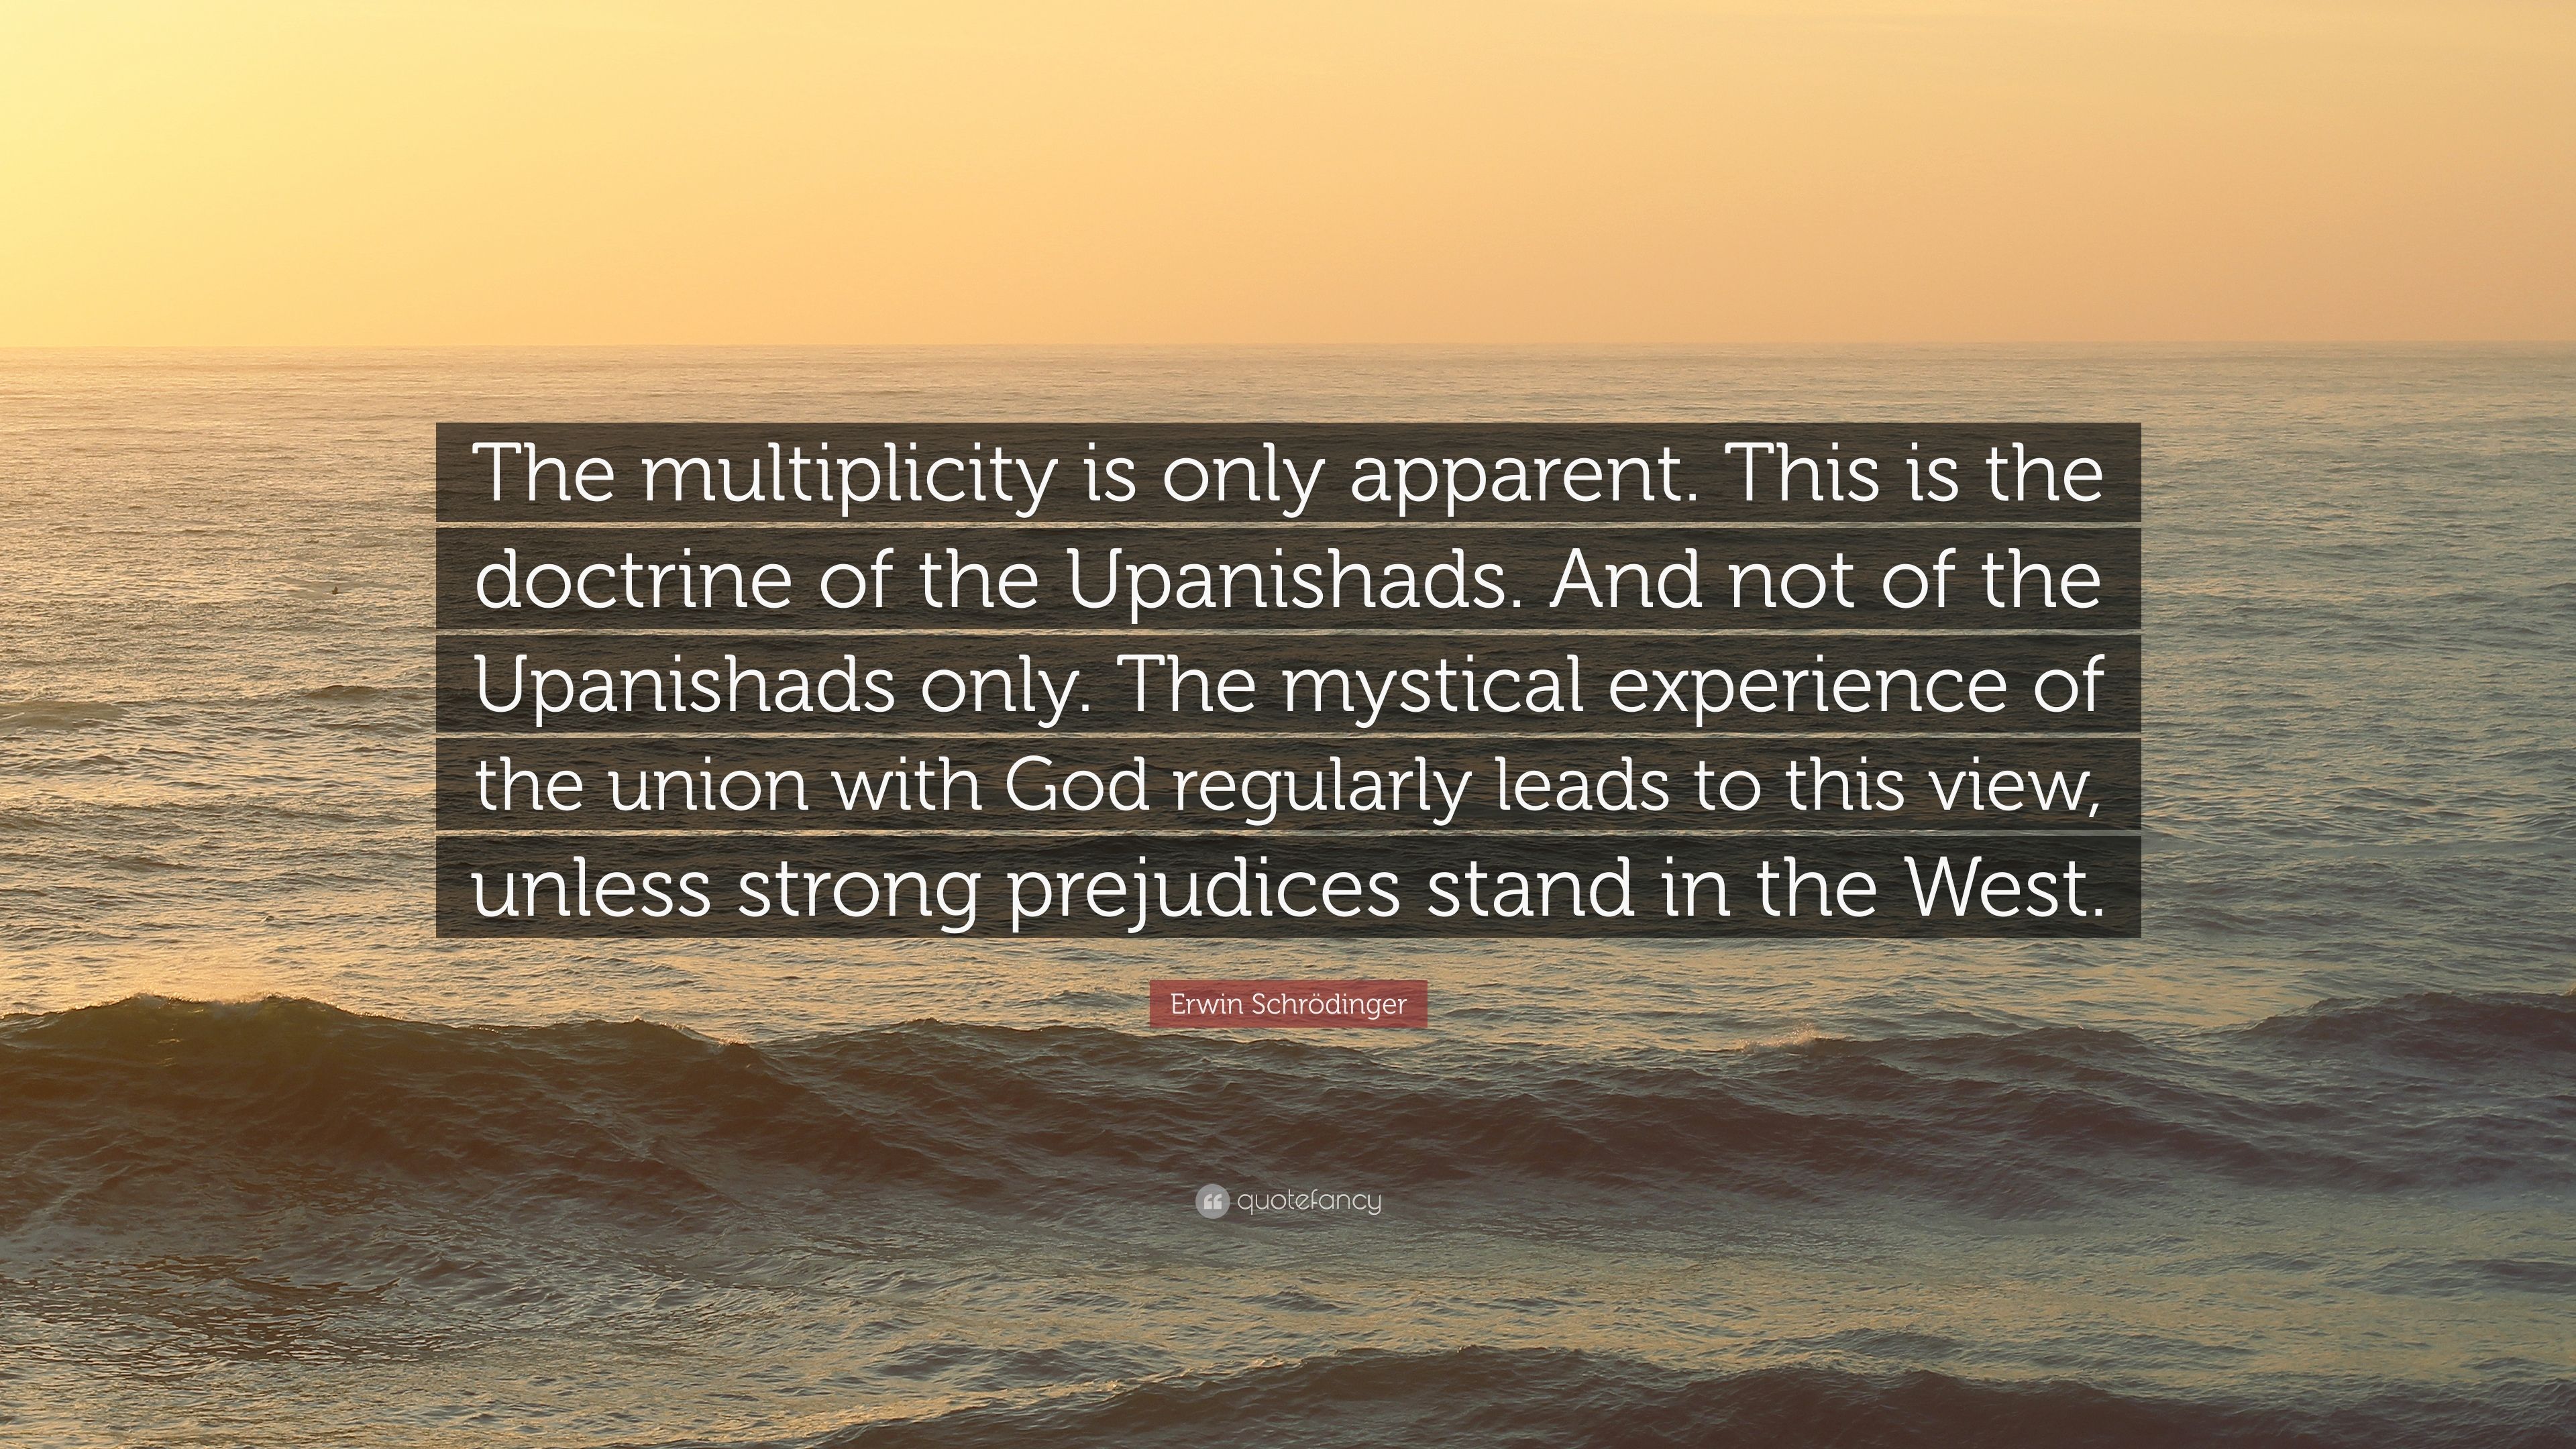 The multiplicity is only apparent. This .quotefancy.com